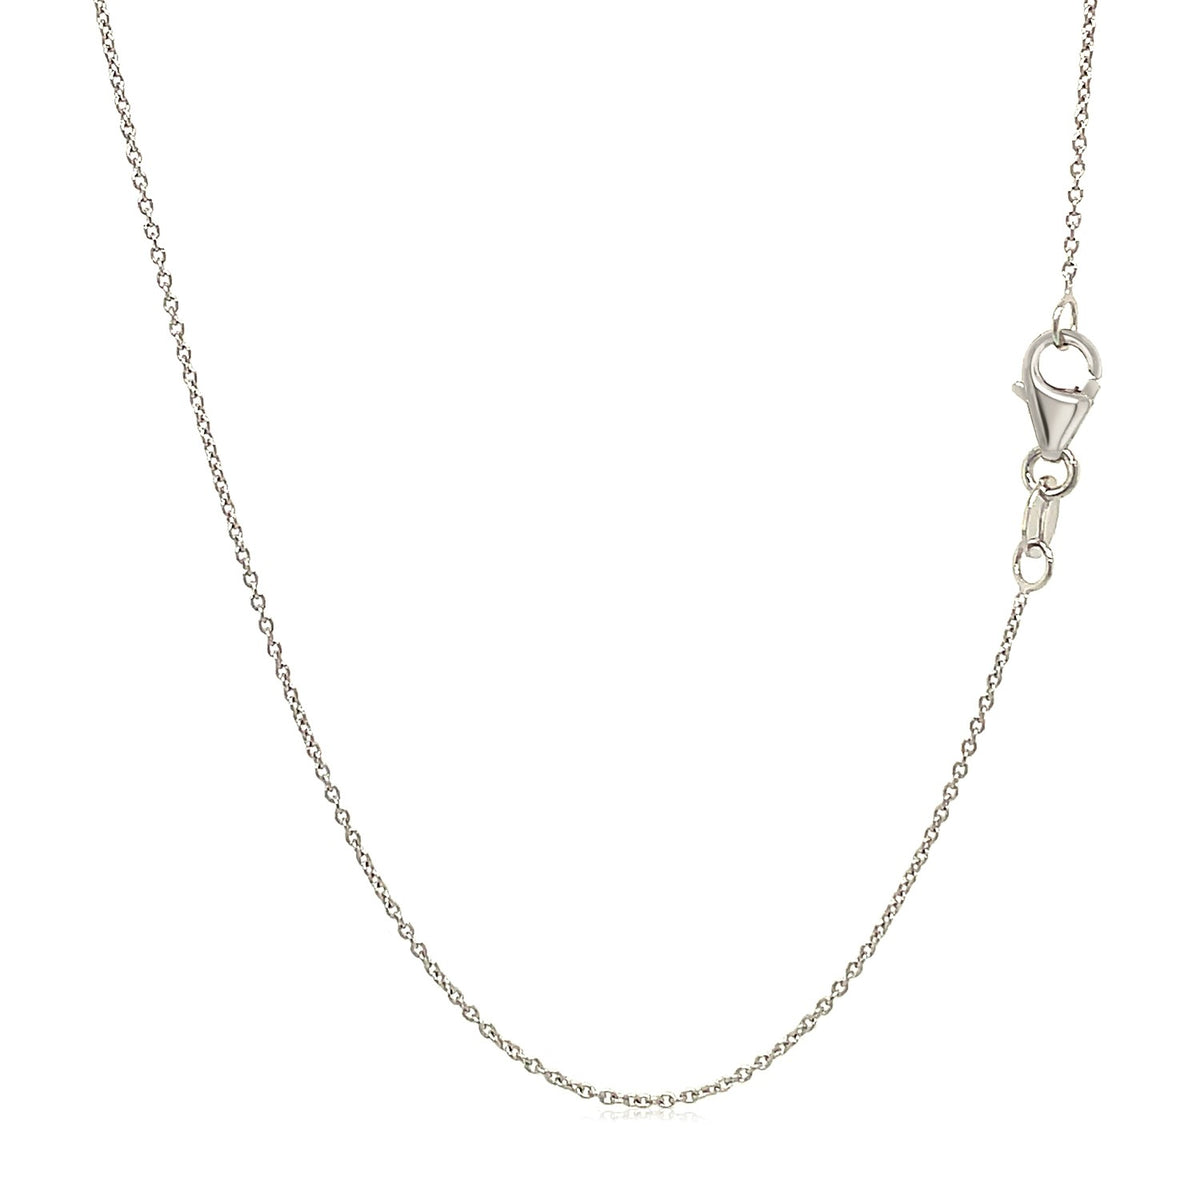 Oval Cable Link Chain - 14k White Gold 0.85mm